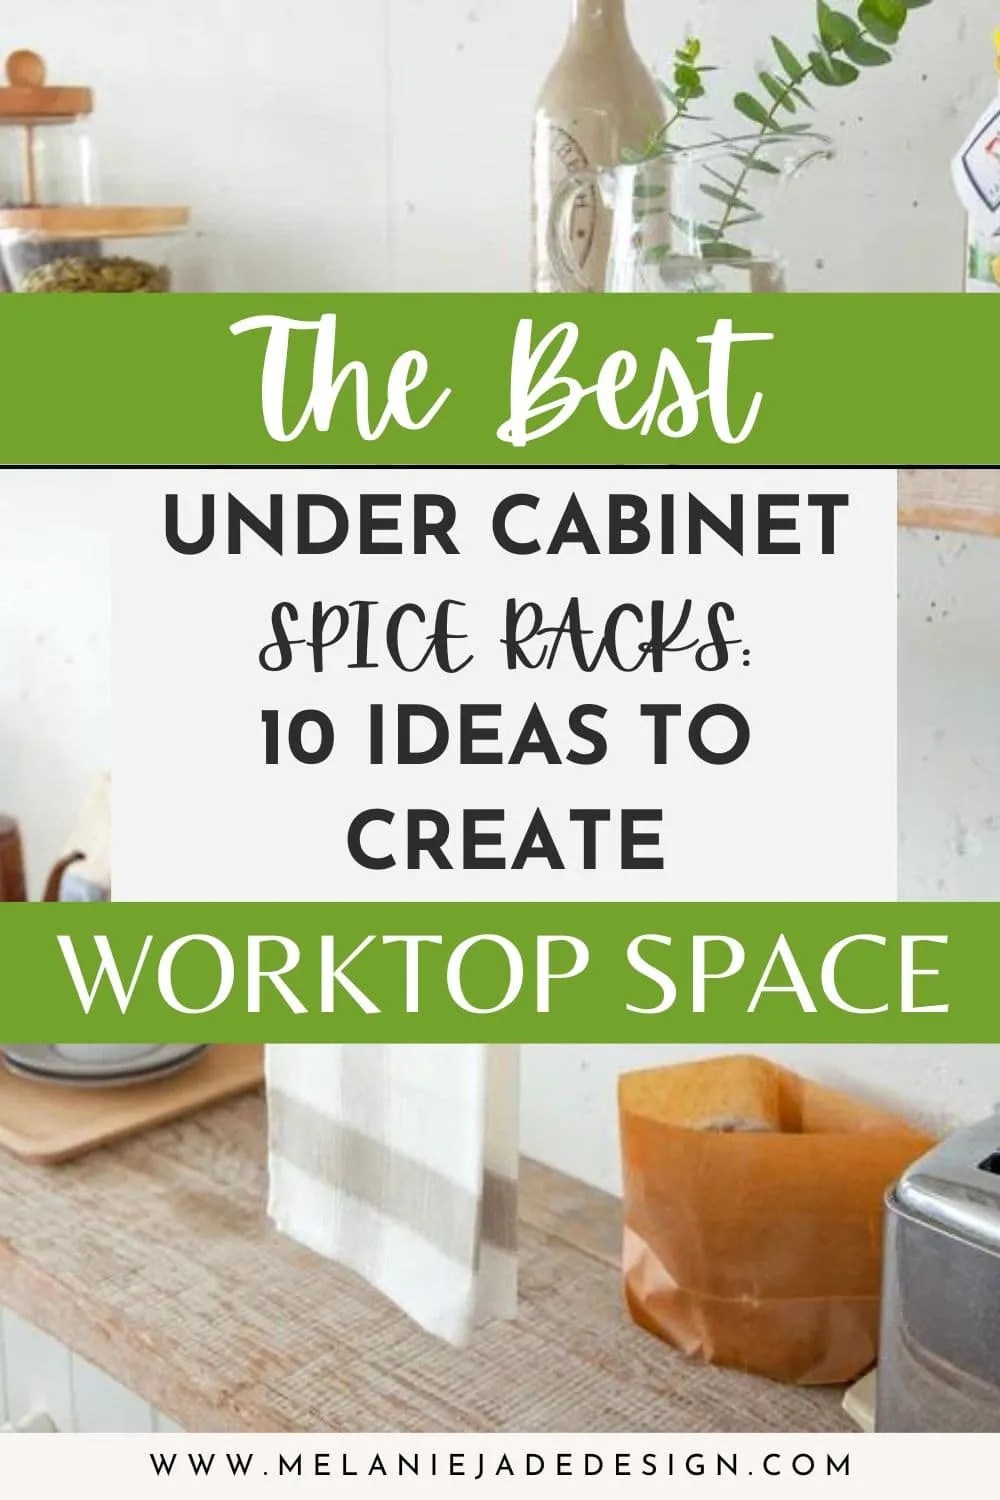 The Best Under Cabinet Spice Racks - 10 Ideas to Create Worktop Space Pinterest pin